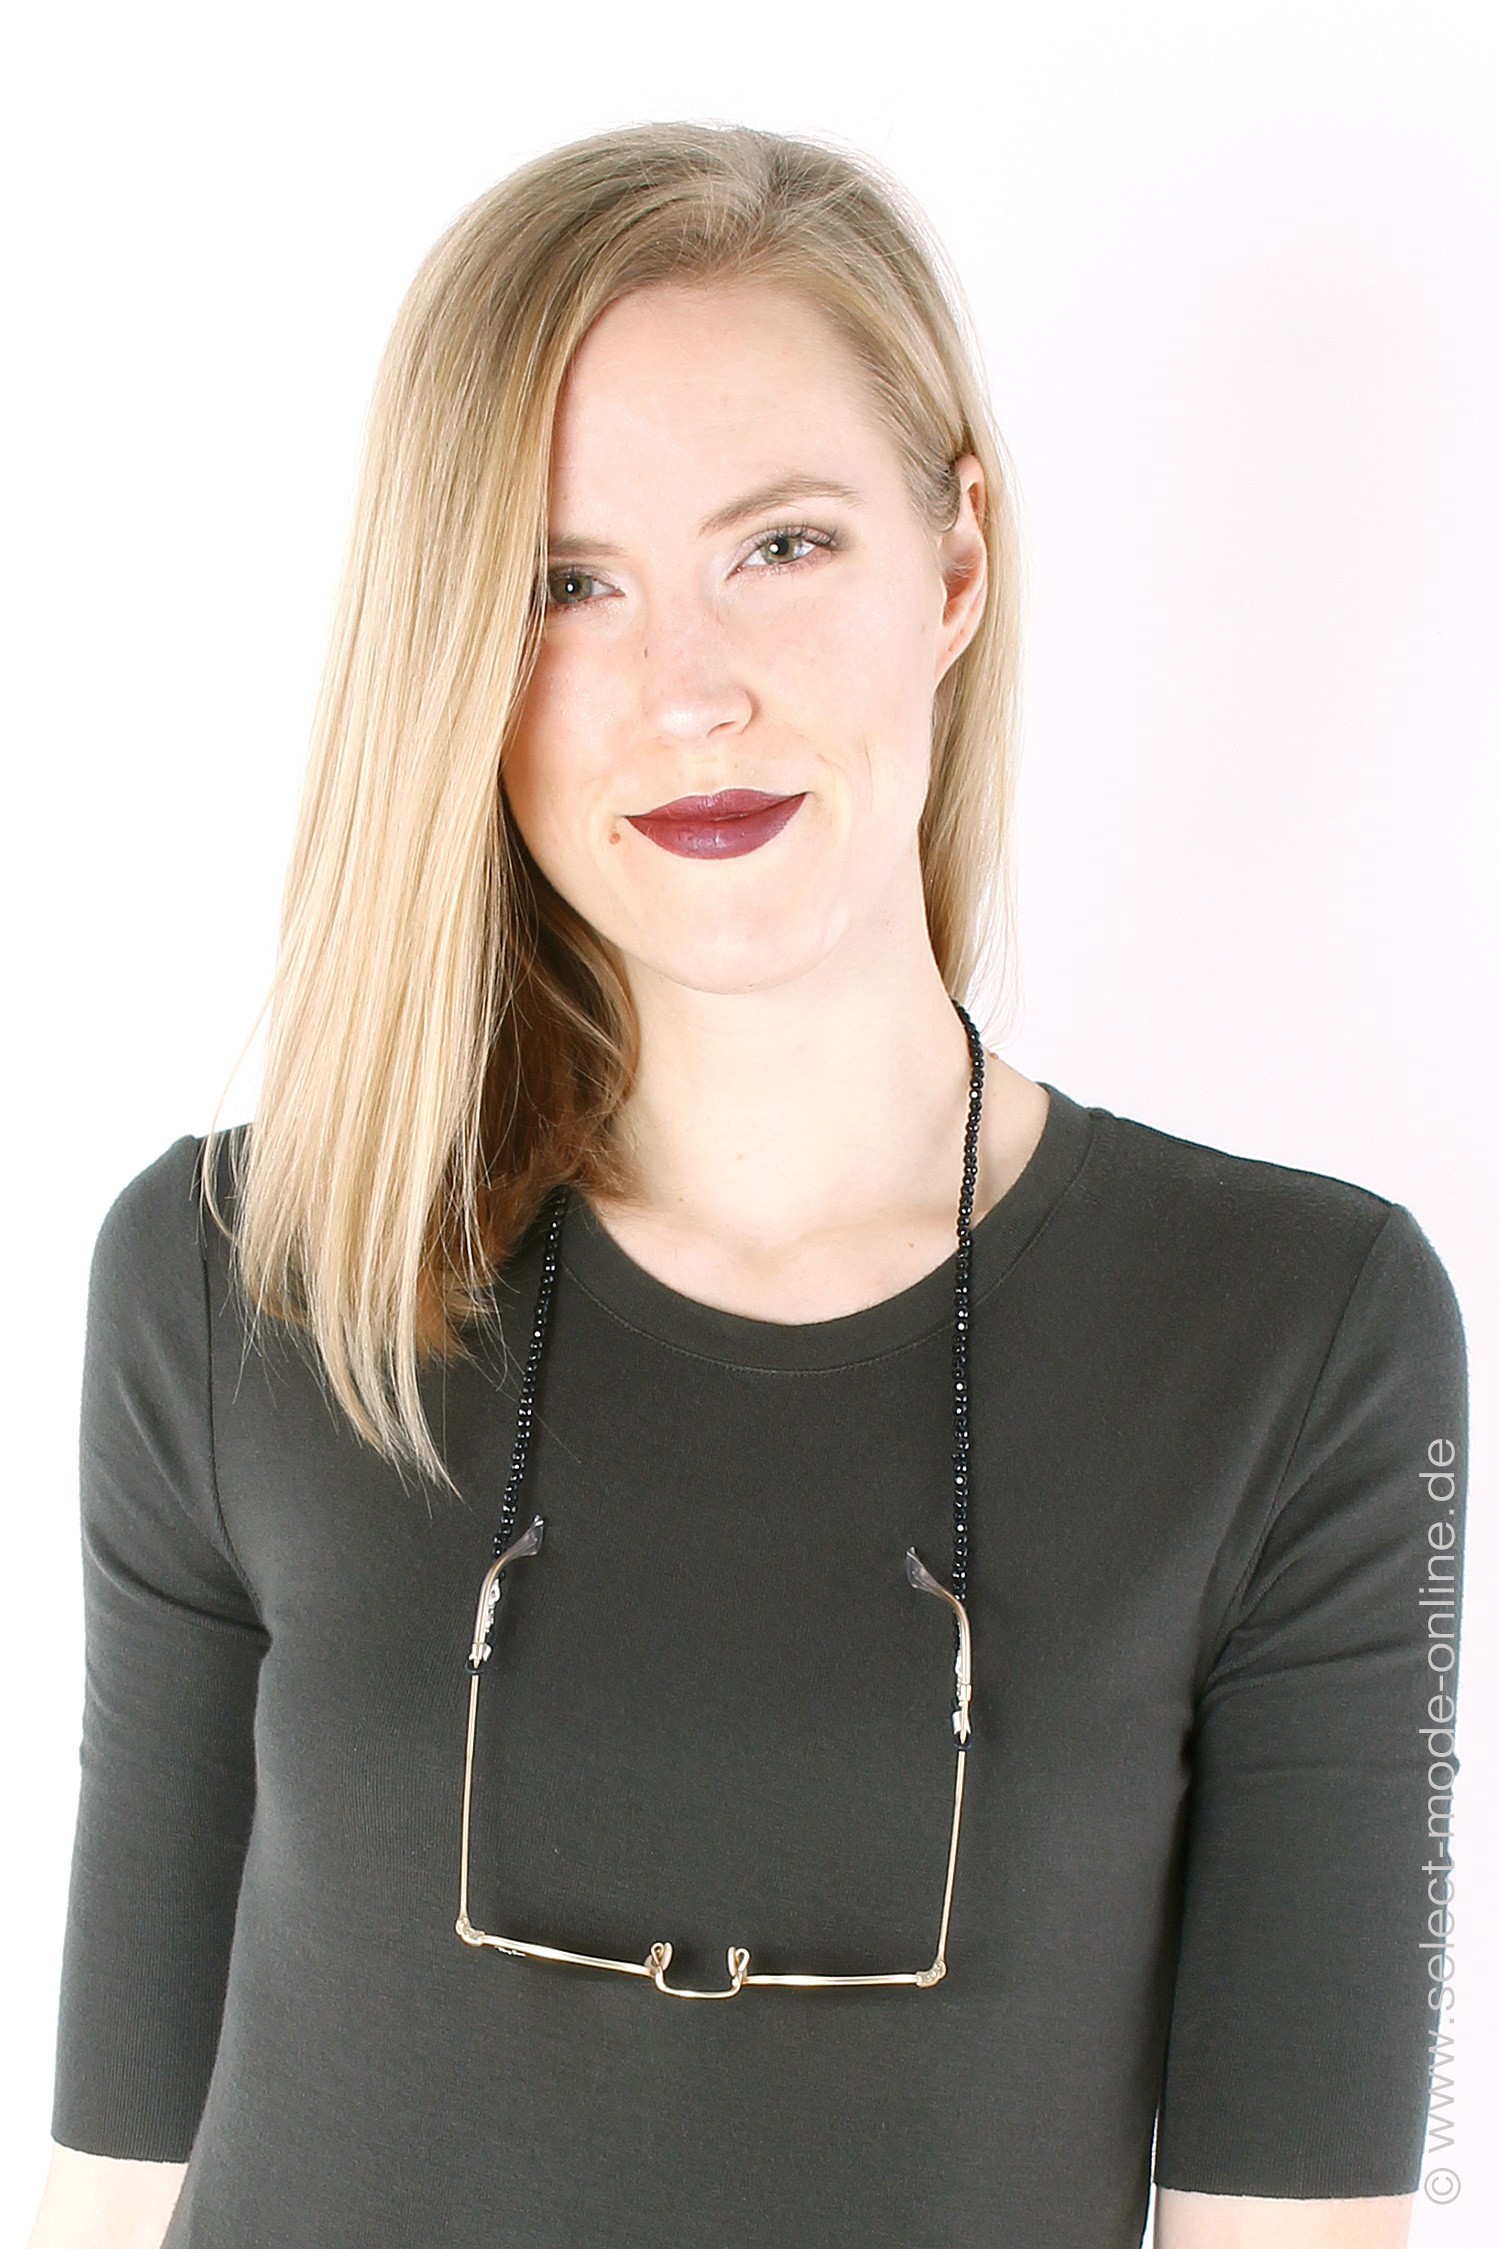 Glasses chain & Necklace - faceted onyx